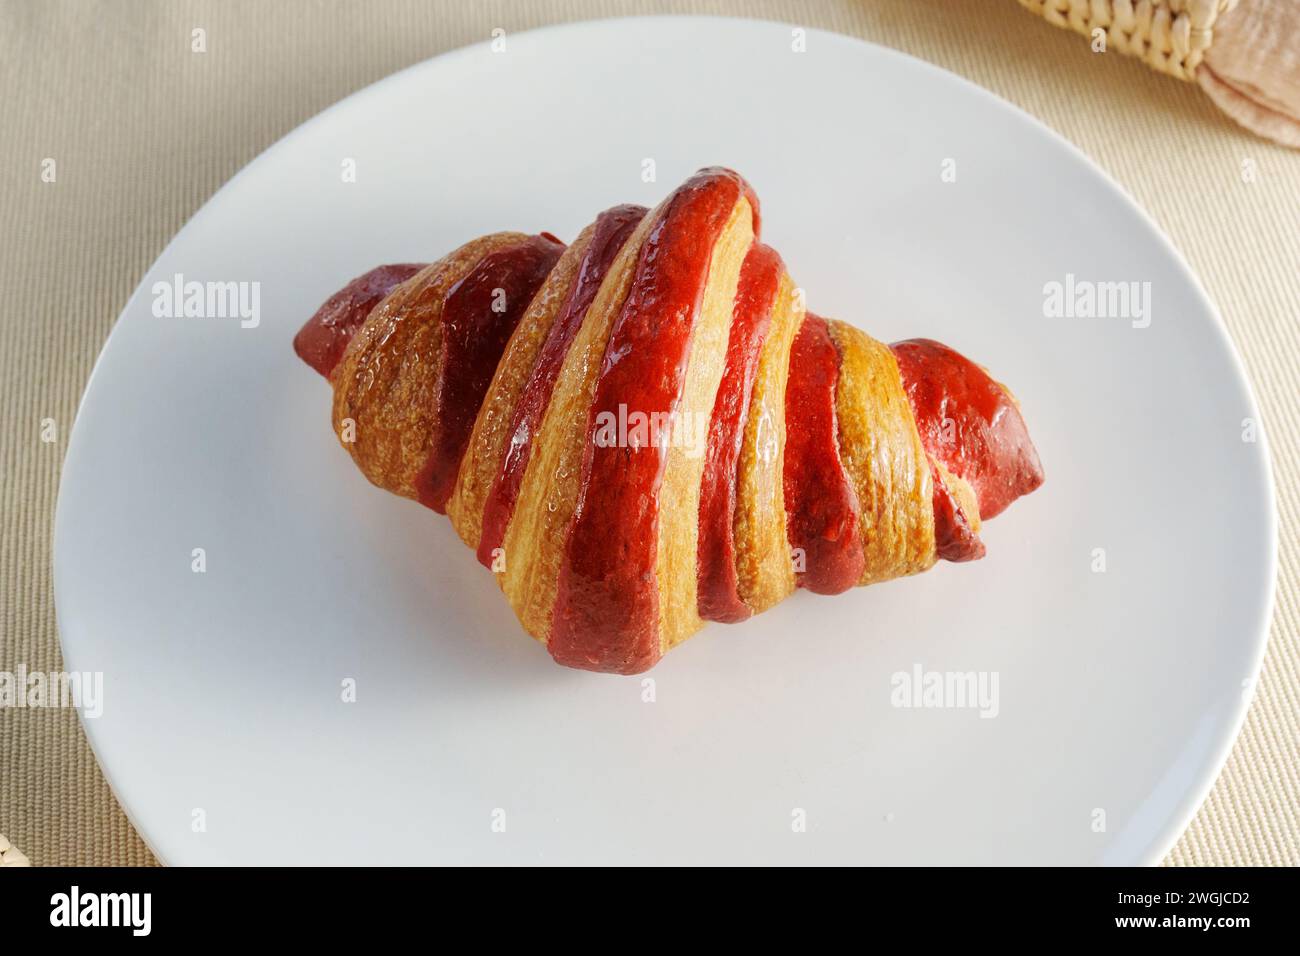 White Porcelain Platter, Adorned With a Juicy Croissant Crimson Strawberry. Stock Photo